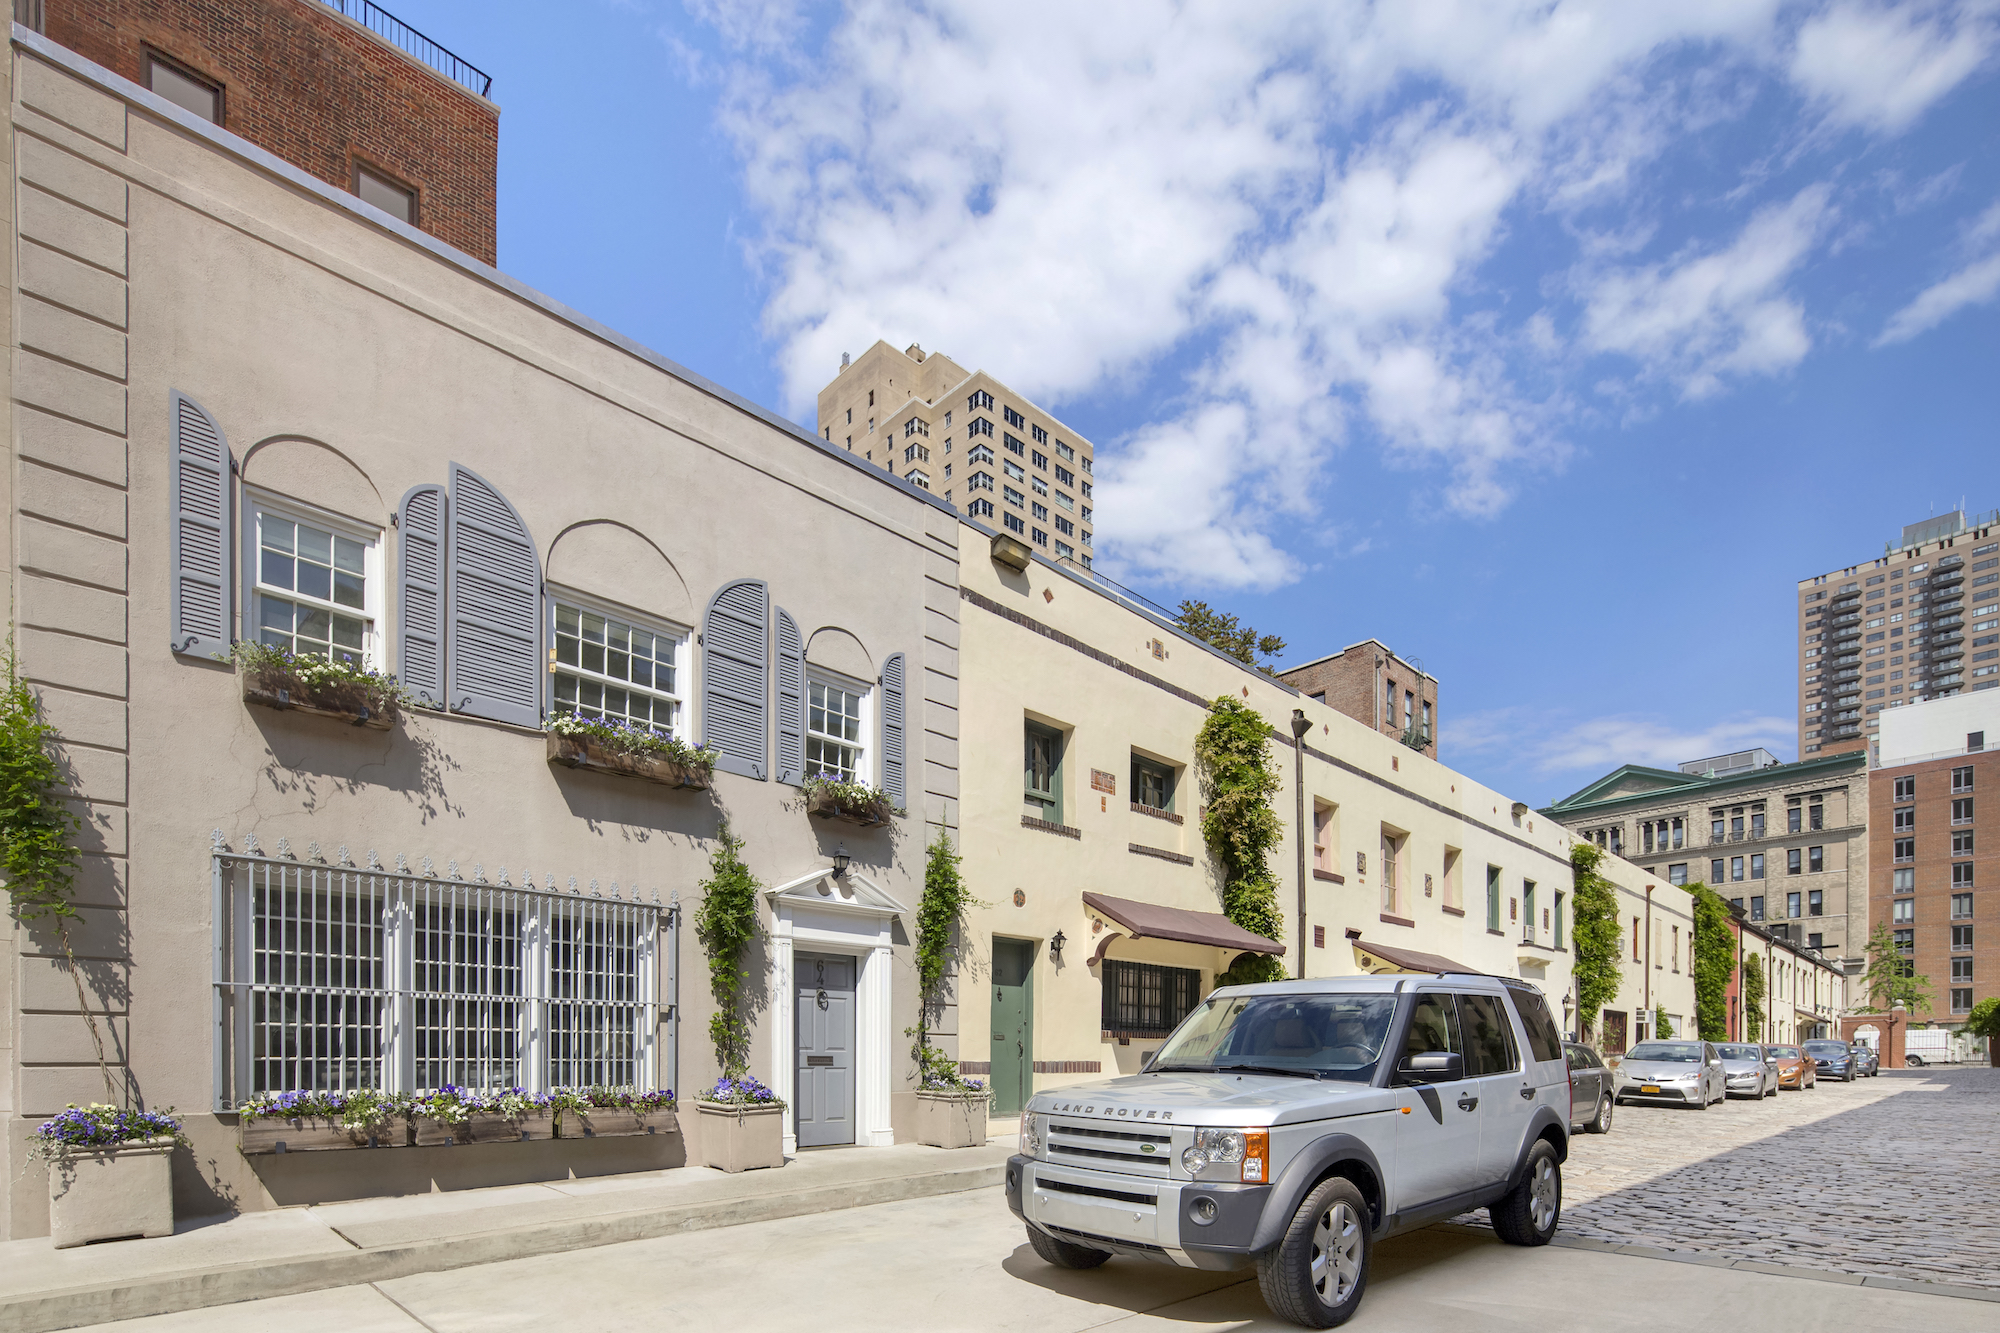 For $10.5M, a 19th-century carriage house in Greenwich Village’s historic Washington Mews